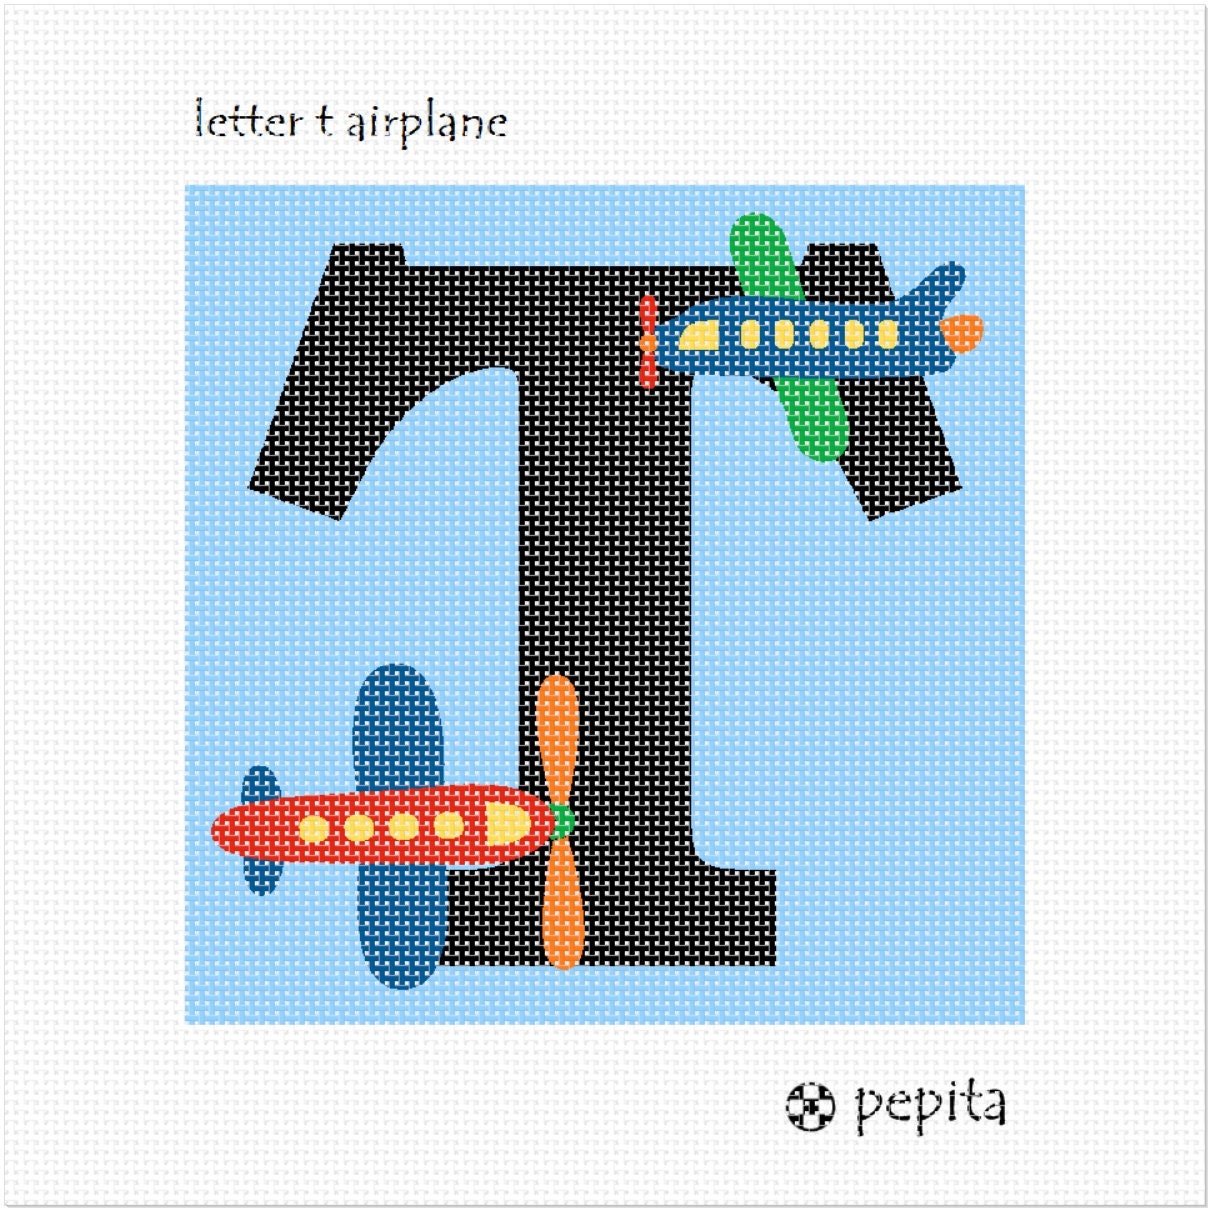 Letter D Airplane Needlepoint Kit or Canvas